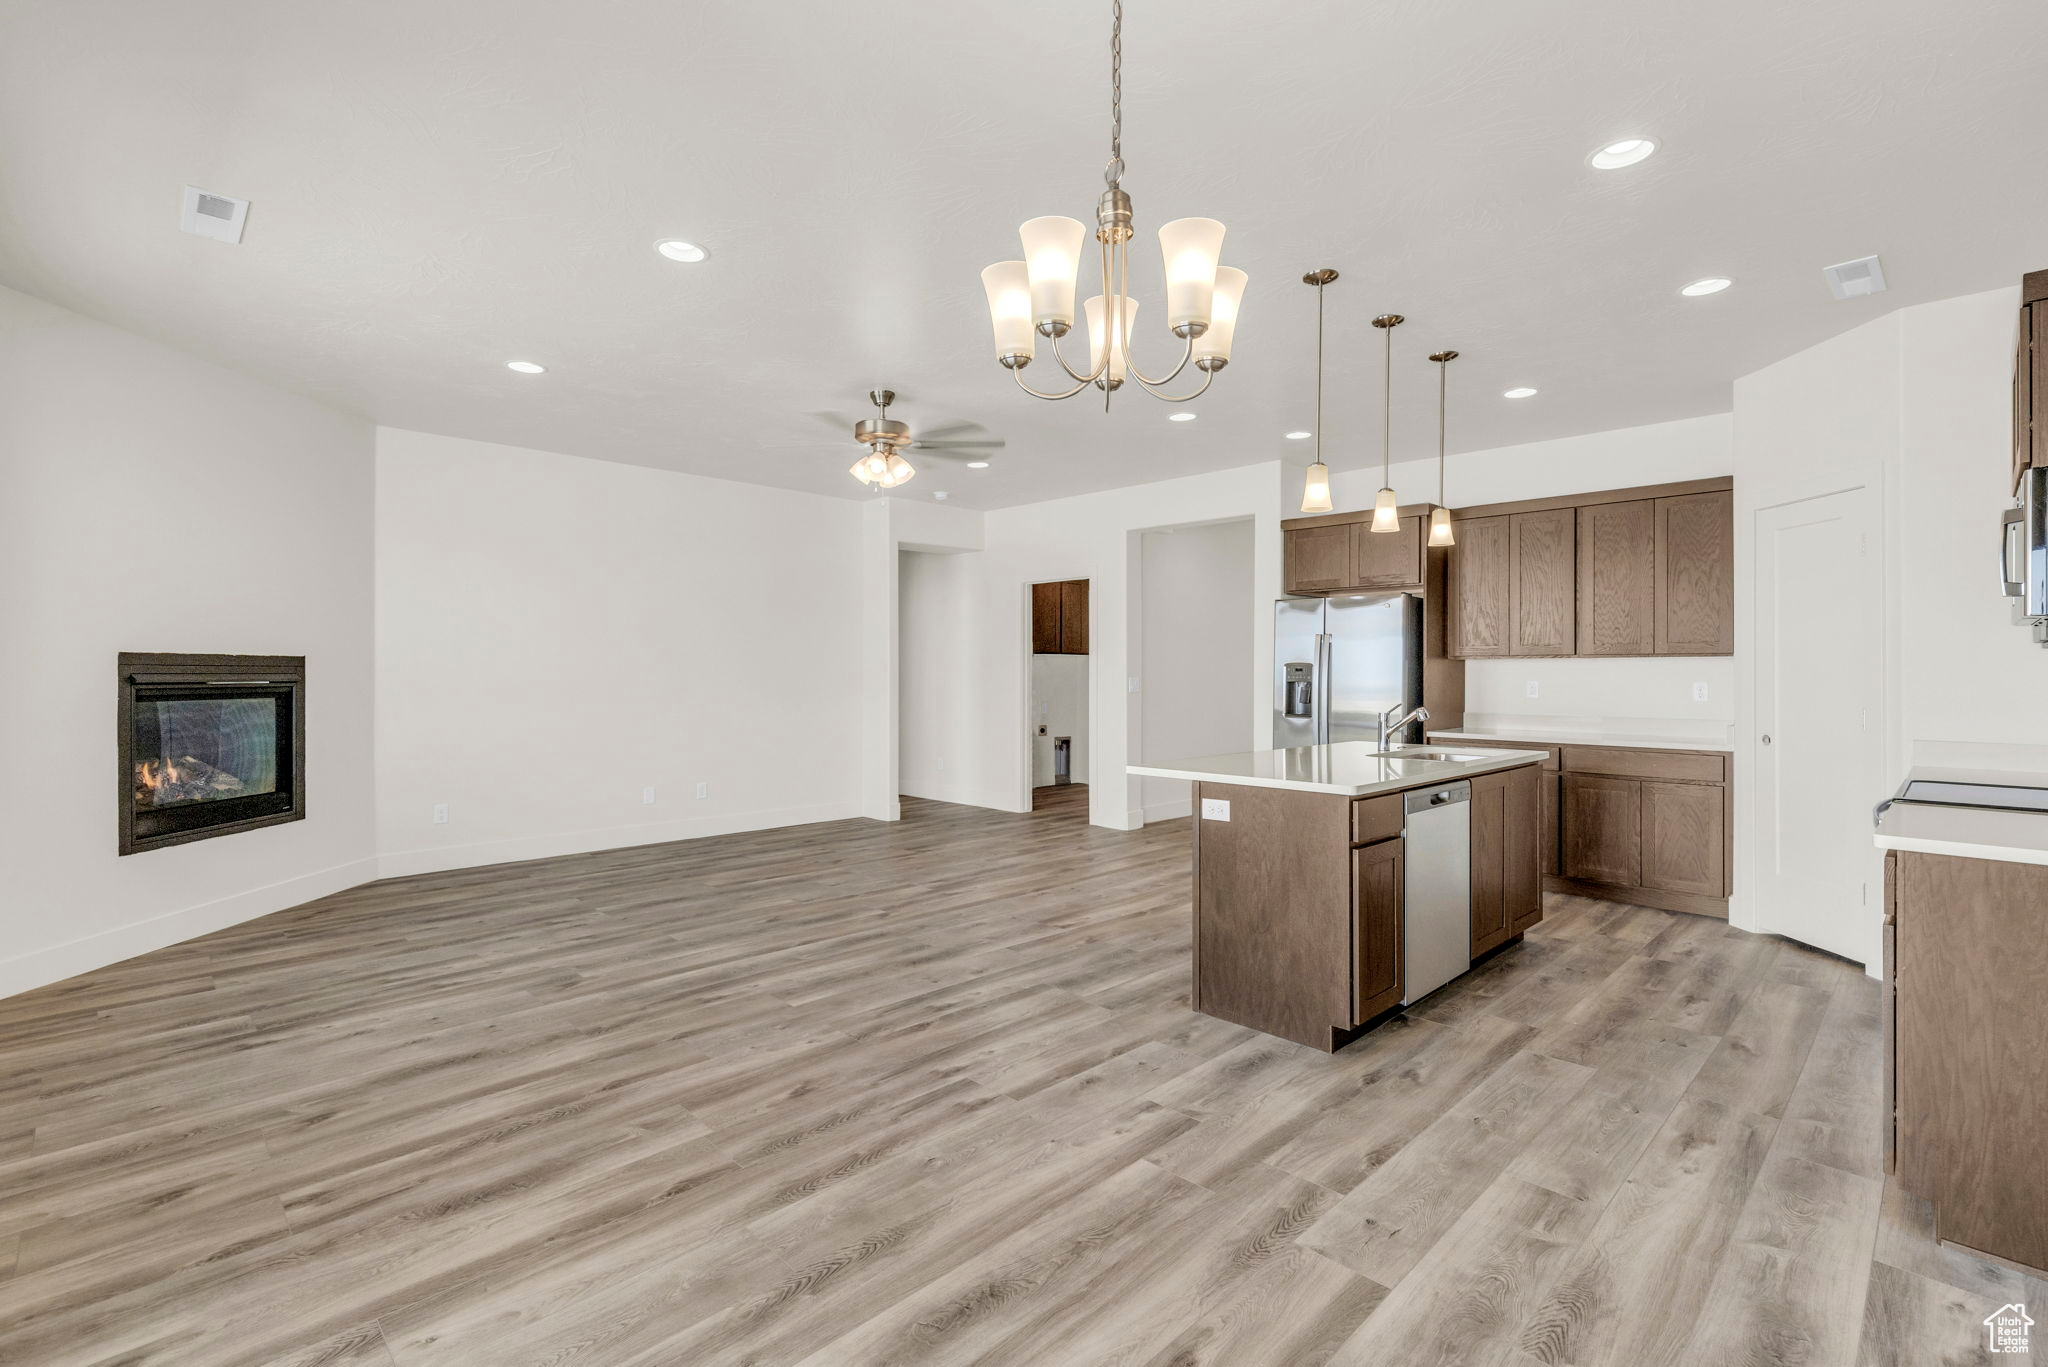 Kitchen with light wood-type flooring, ceiling fan with notable chandelier, stainless steel appliances, hanging light fixtures, and an island with sink